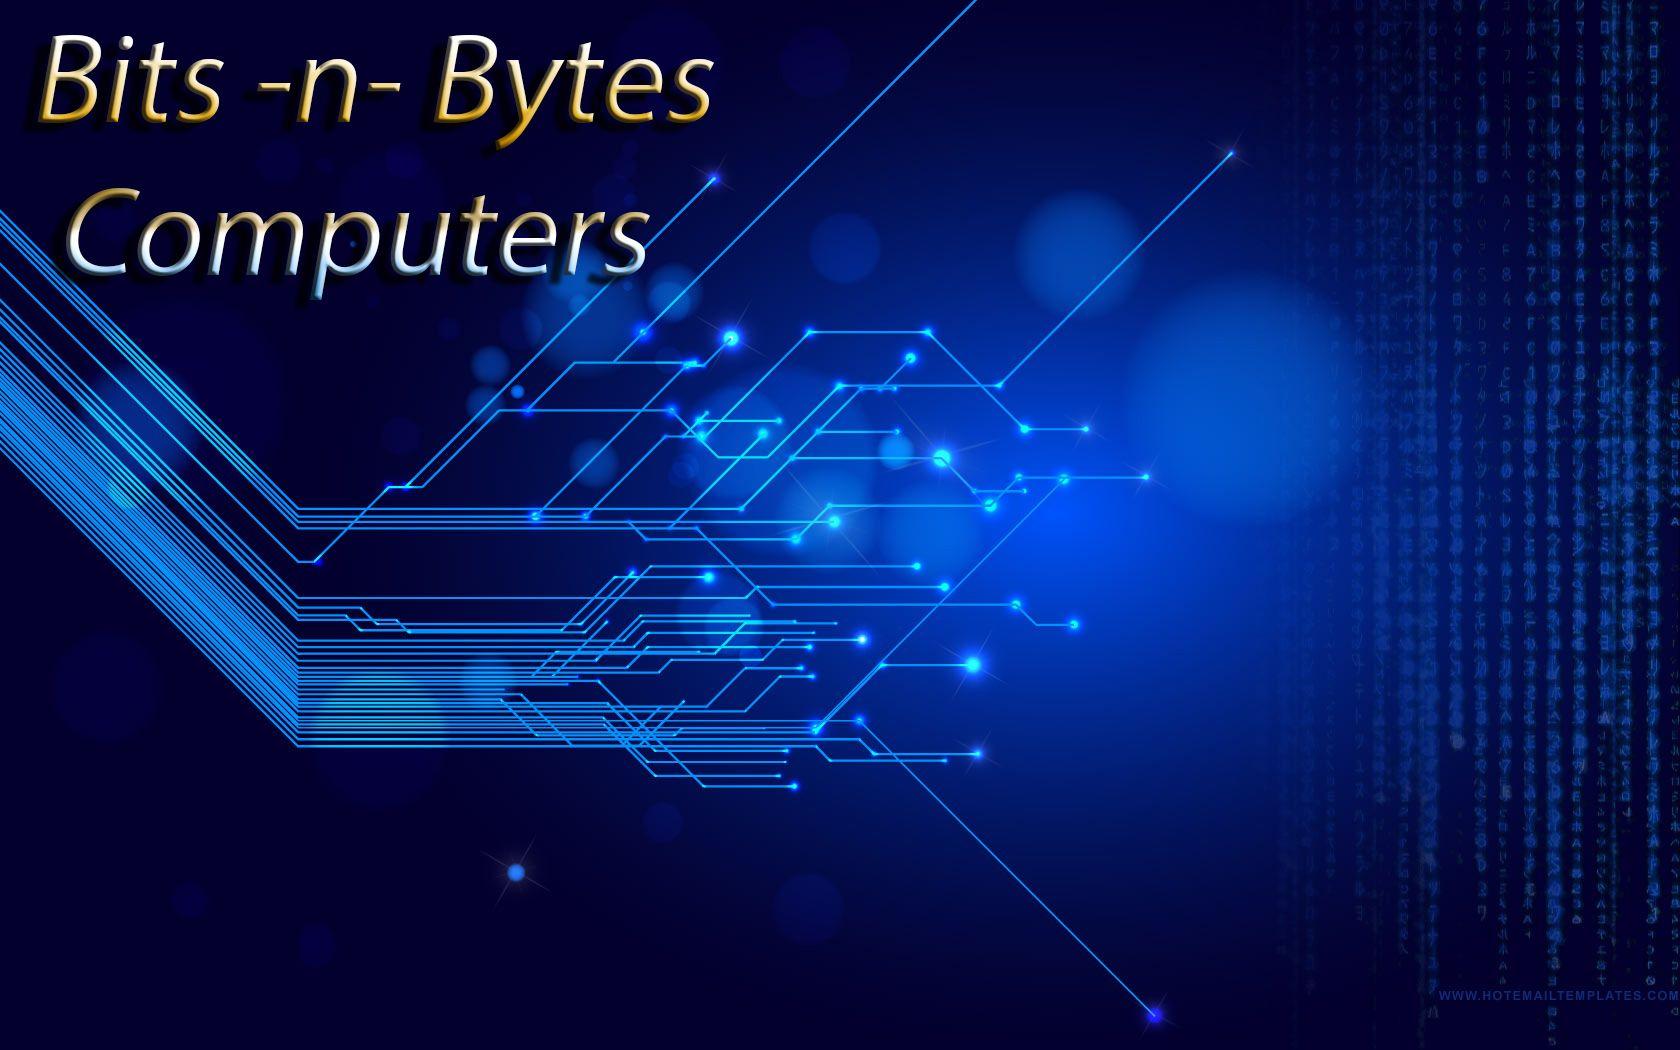 Contact. Bits N Bytes Computers. Anime wallpaper download